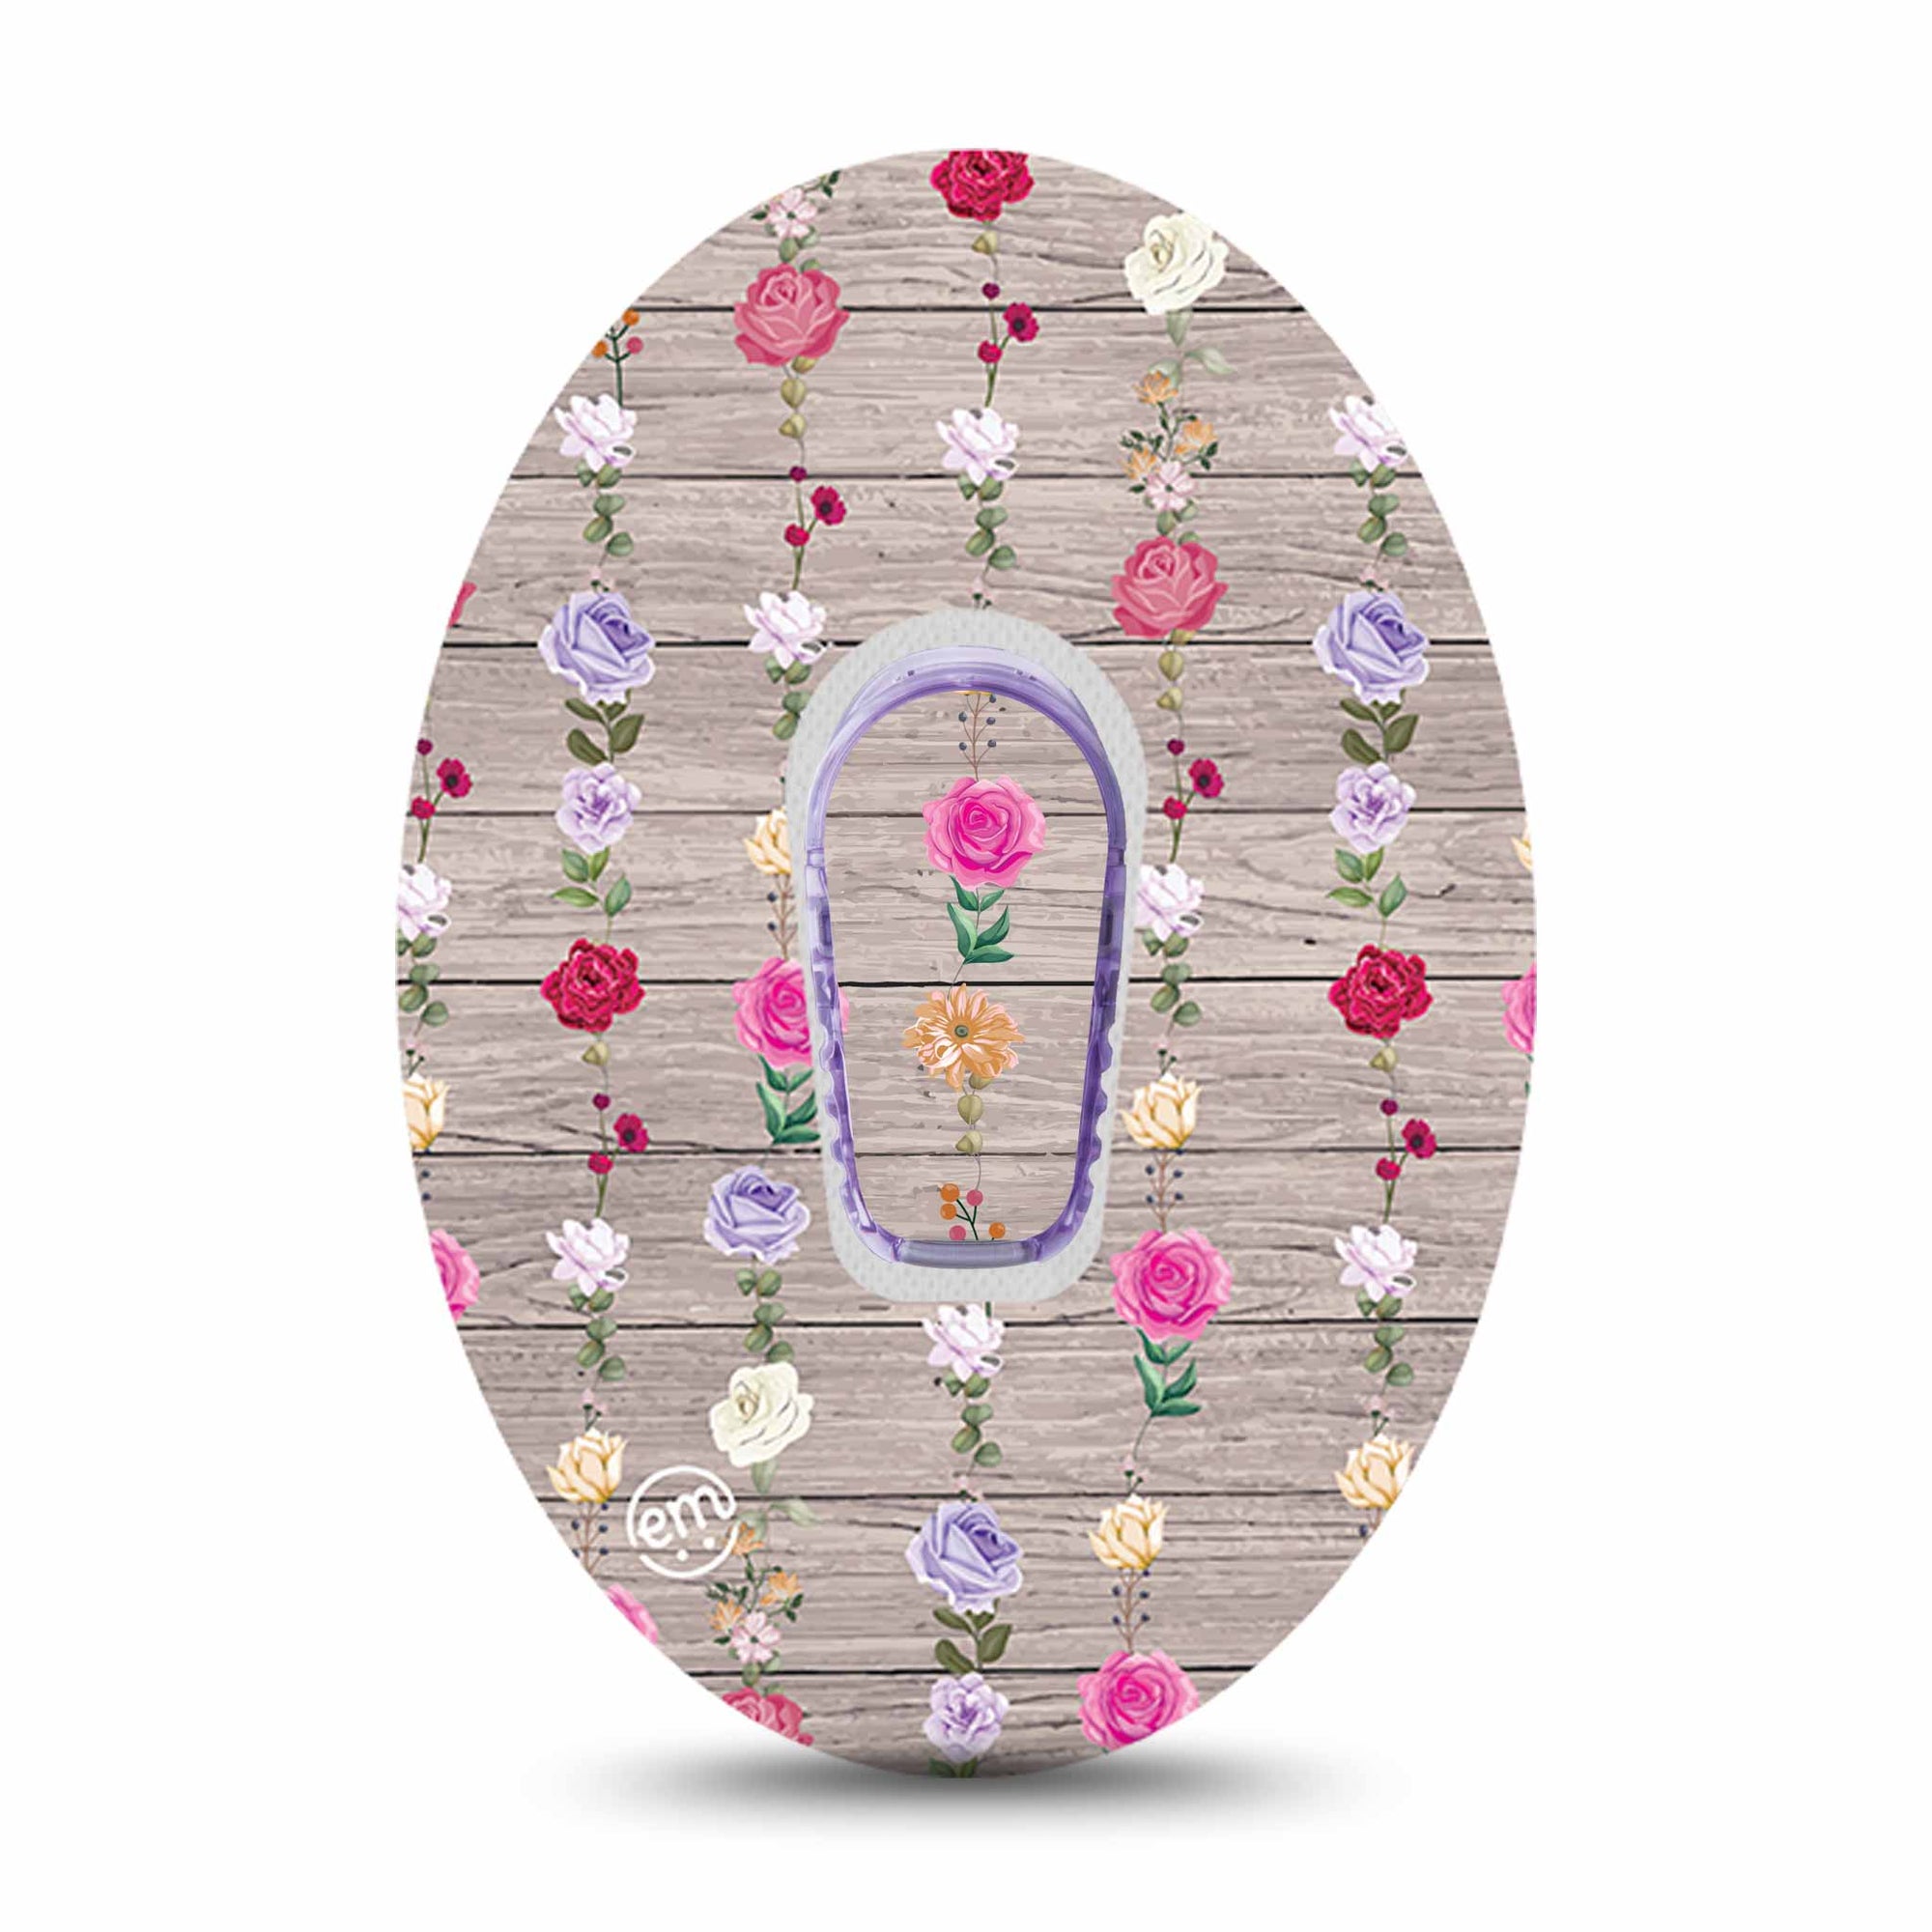 ExpressionMed Hanging Flowers Dexcom G6 Transmitter Sticker with Tape